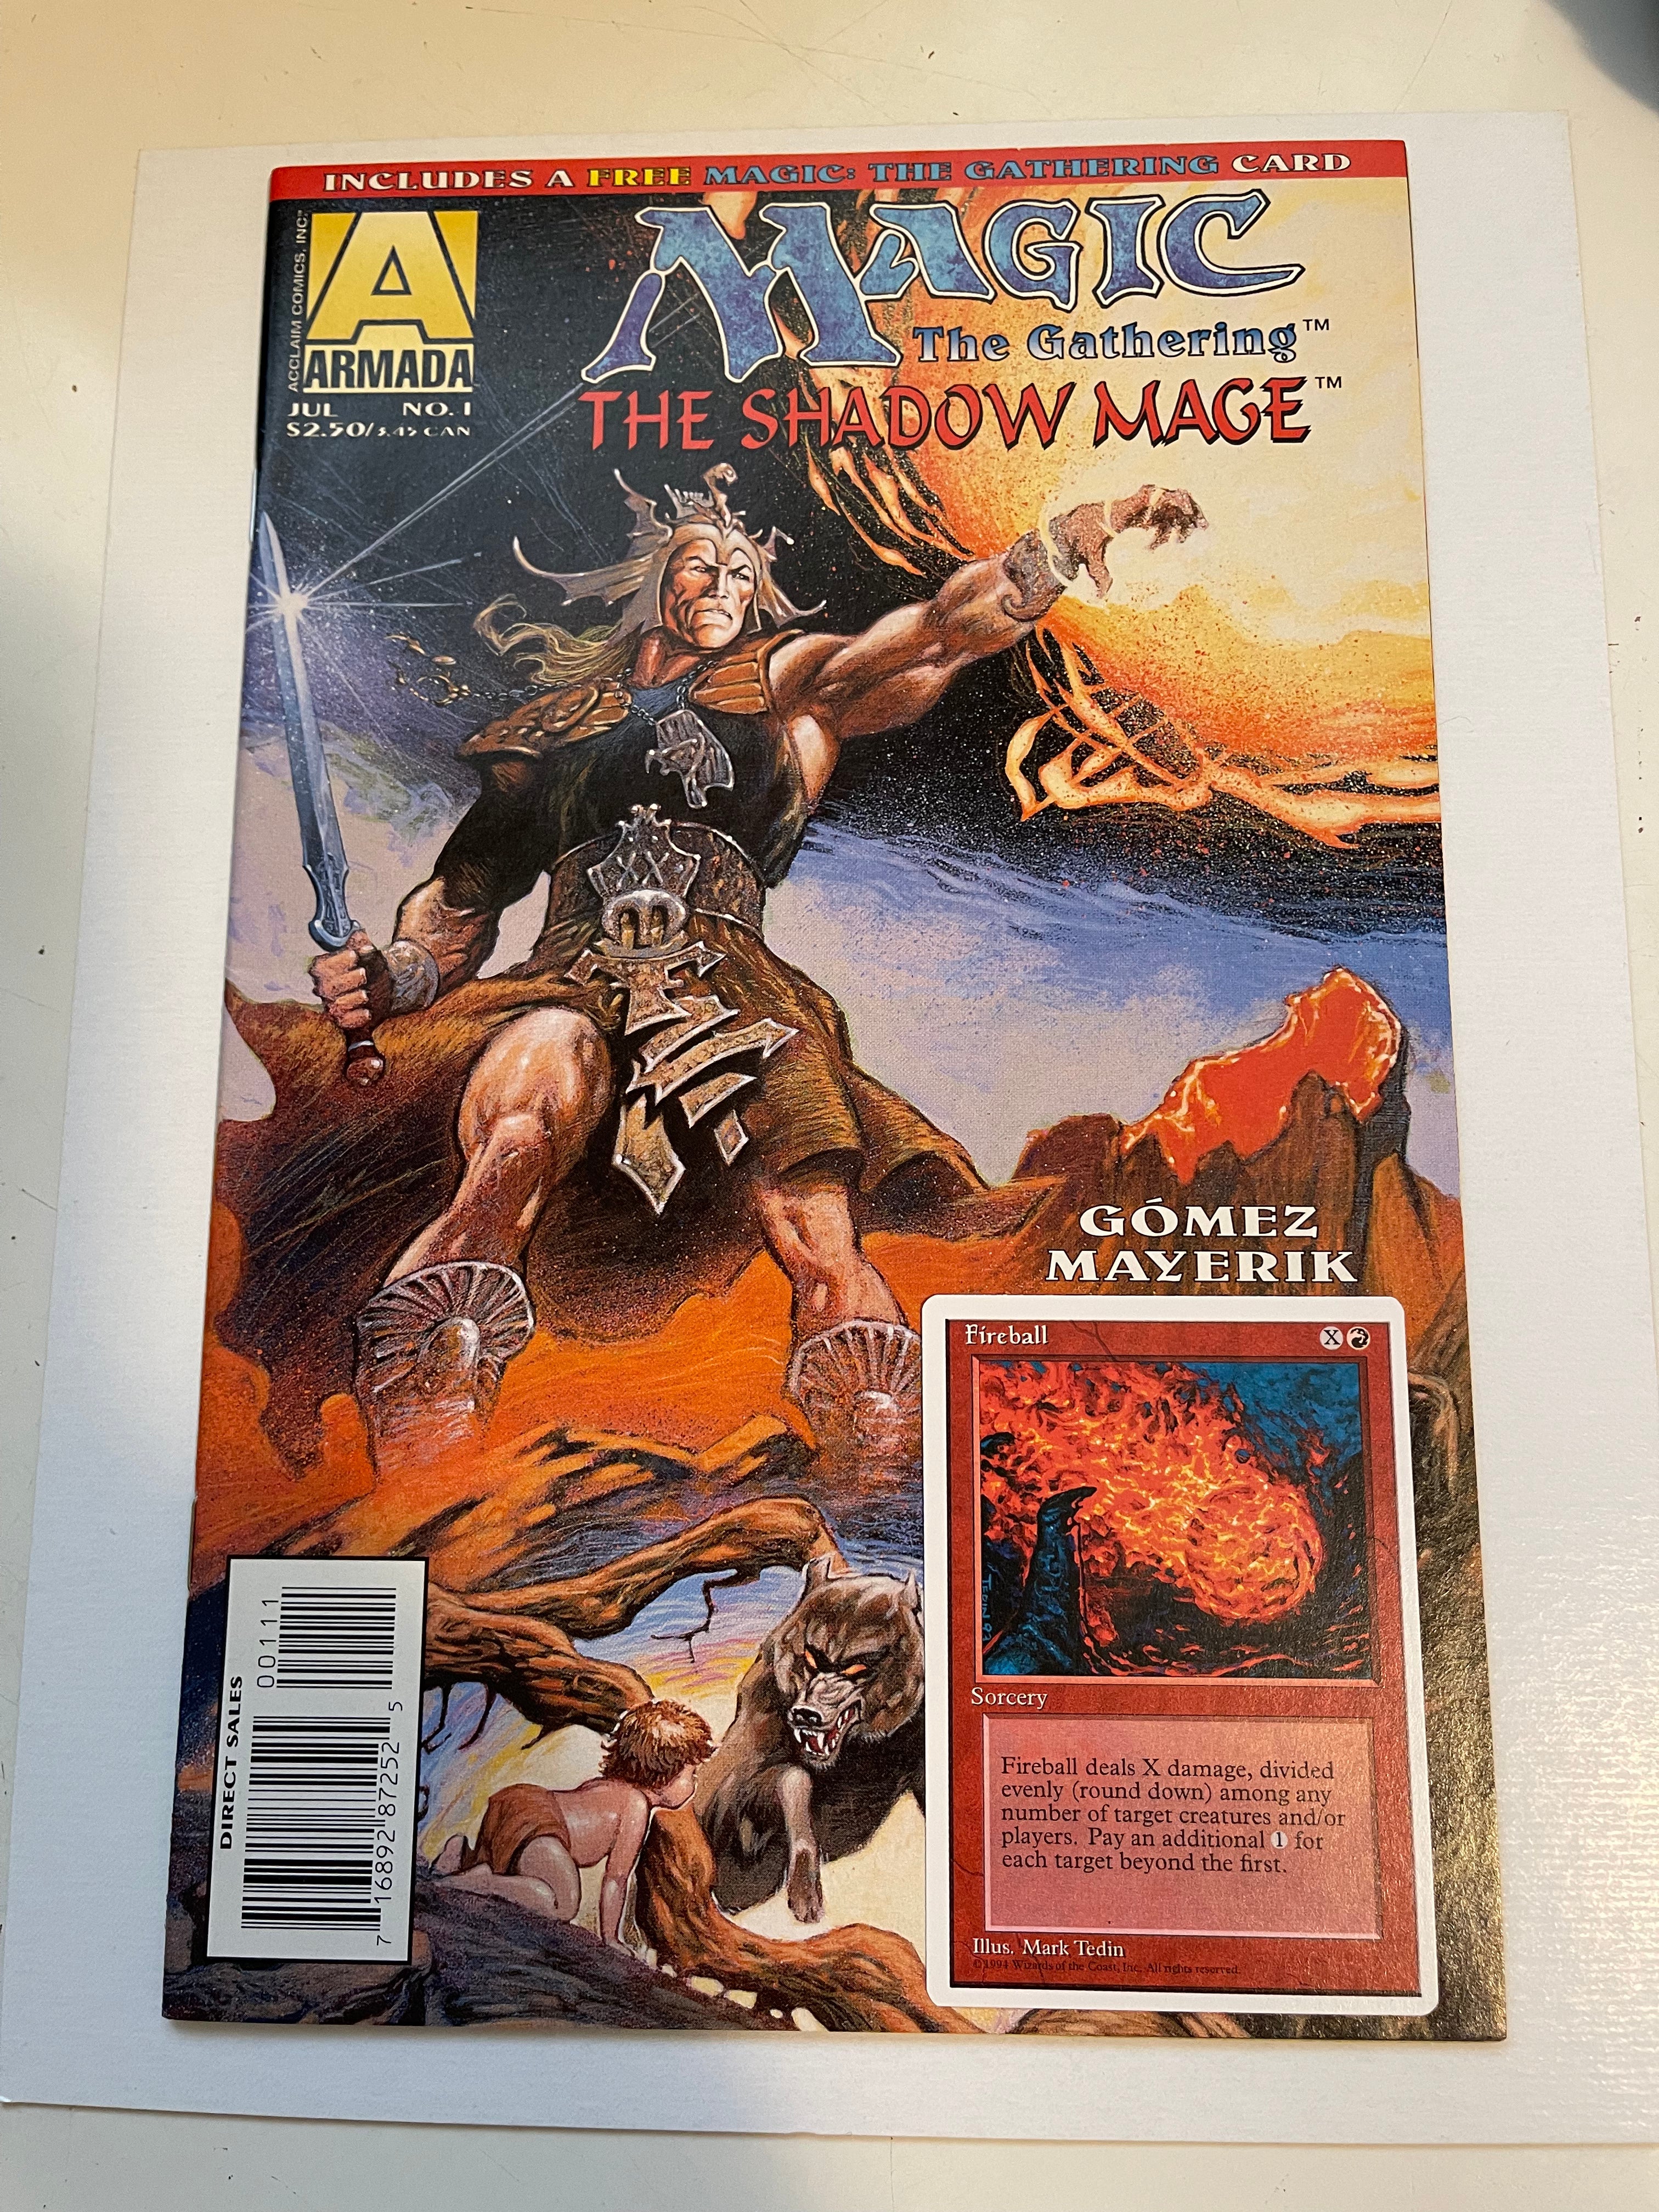 Magic The Shadow Mage #1 comic with card